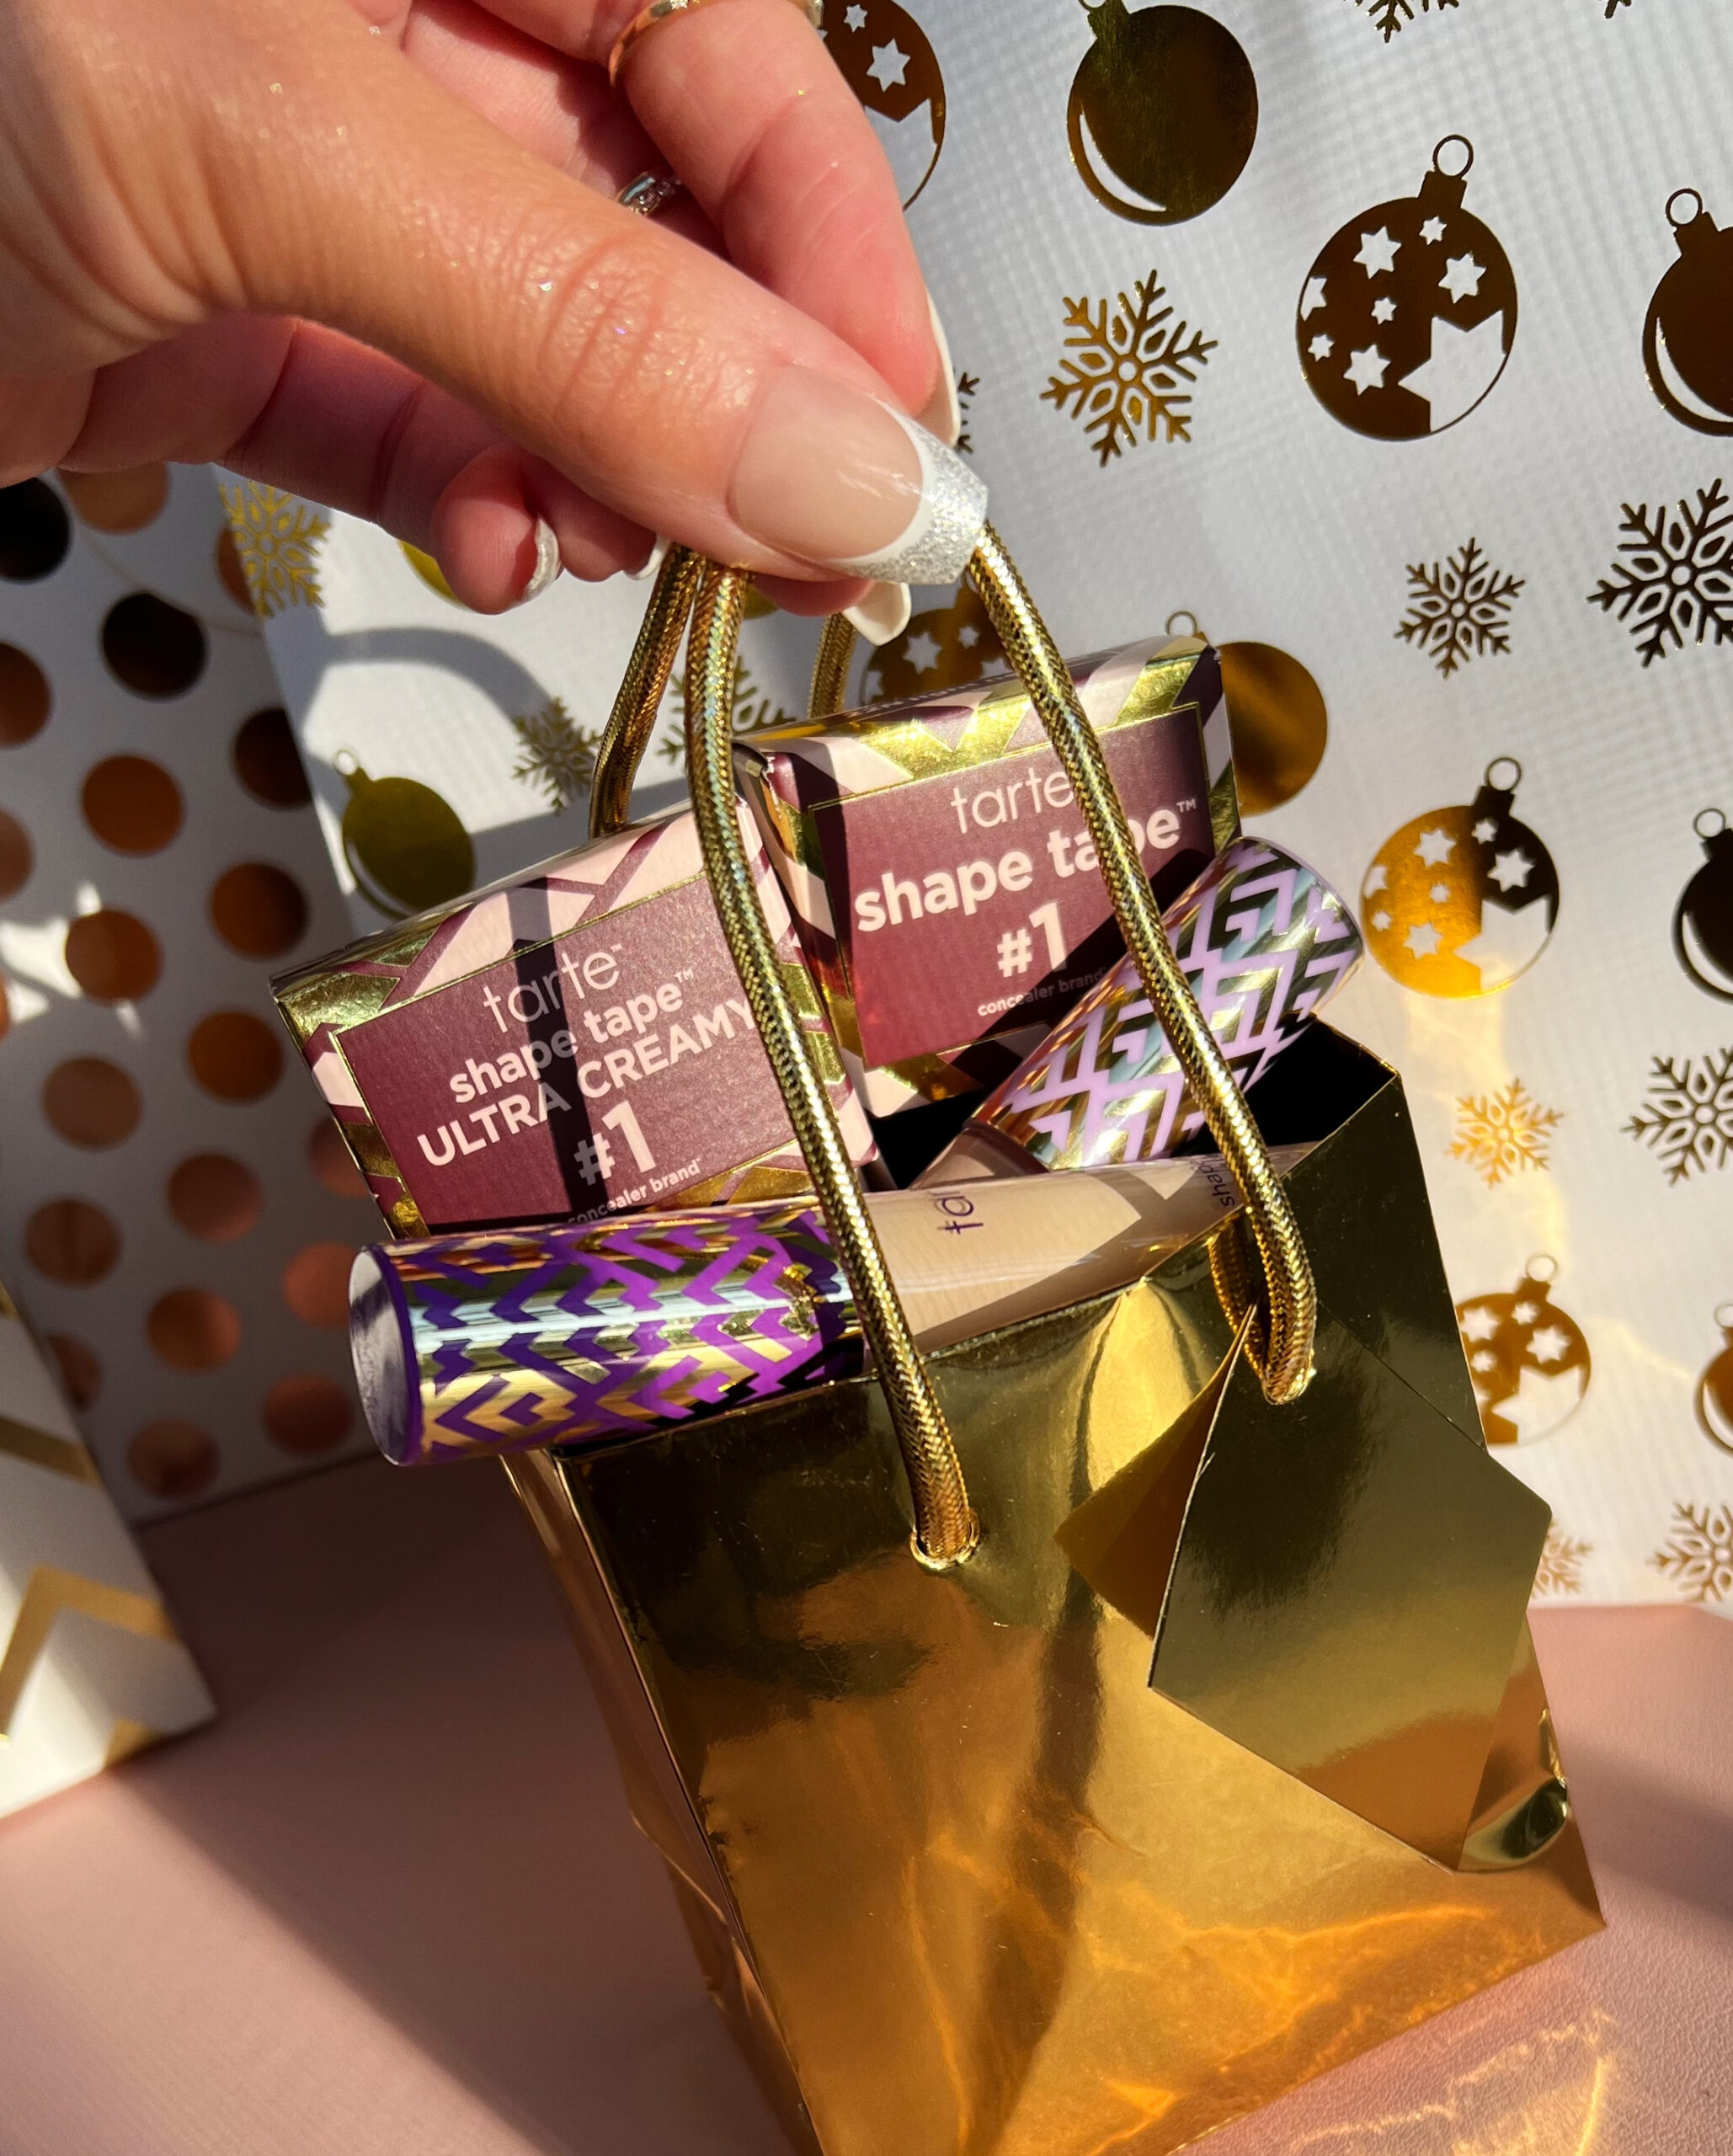 Tarte Shape Tape Concealers + Best-Sellers Holiday Sets ONLY $20 at Ulta Beauty - Now Through 12/3